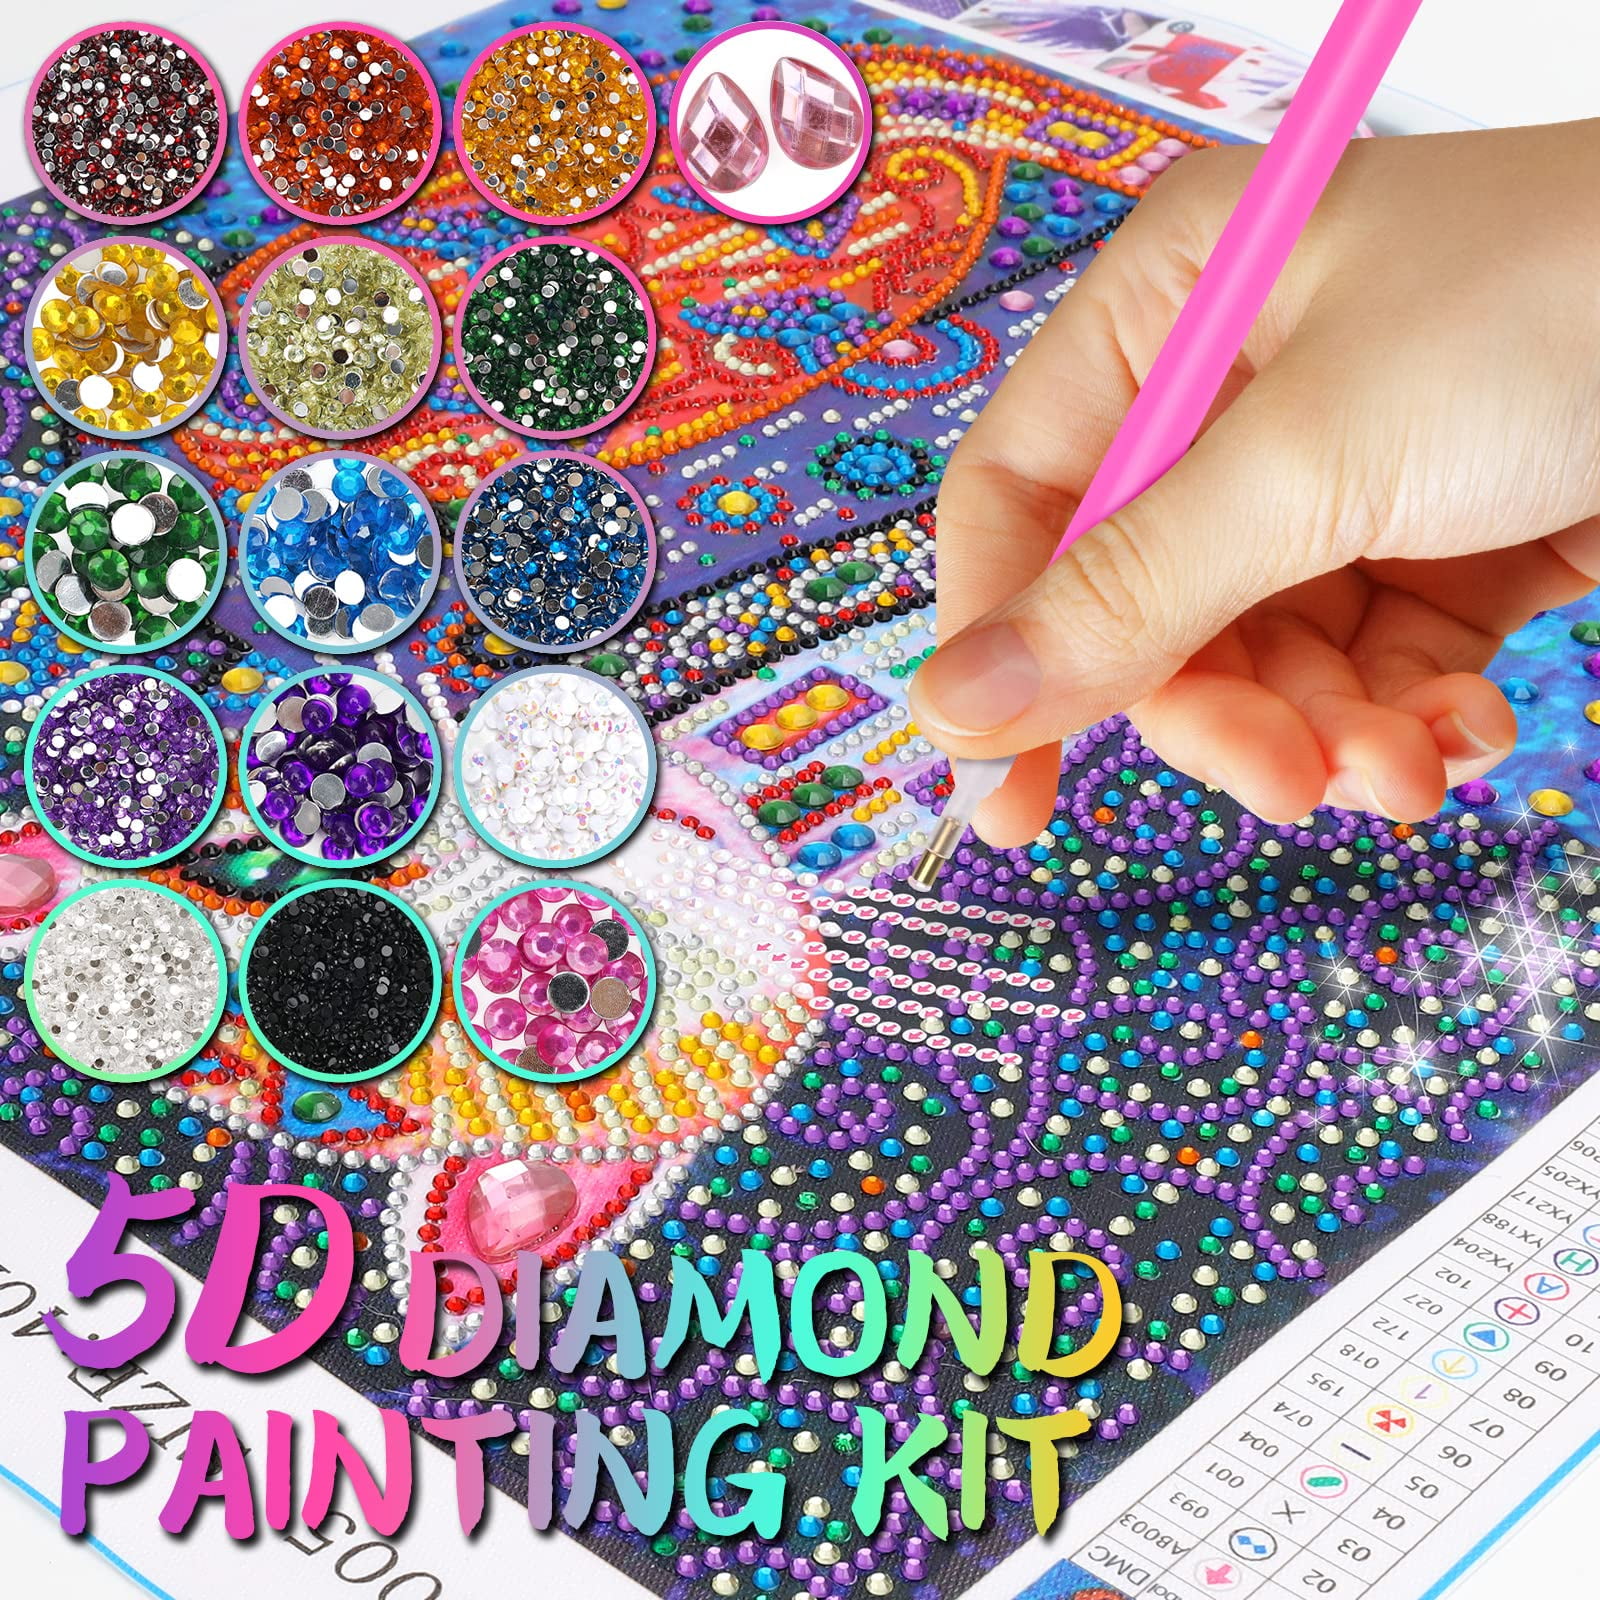 Arts and Crafts for Kids Boys Girls Age 12 11 10 9, Dog Painting Gifts for  Teenage Girls Boys 11-12 years old-5D Diamond Art Kits Diamond Embroidery